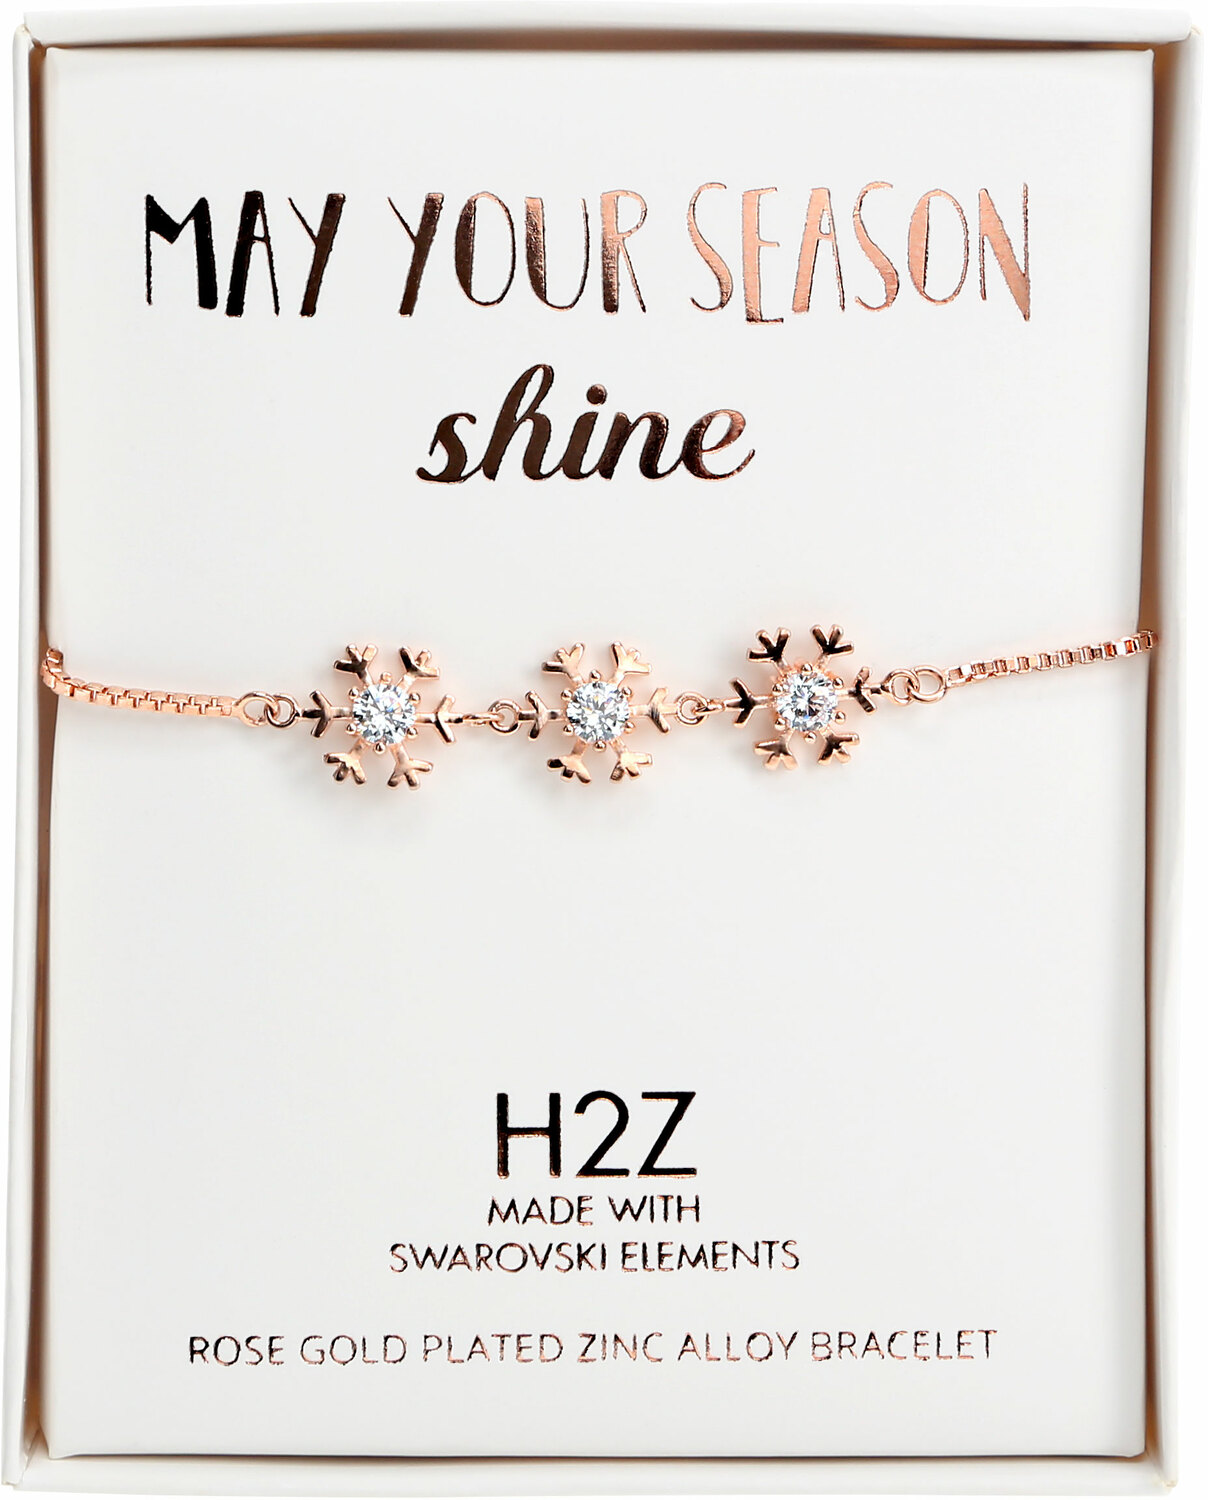 Crystal Snowflake
in Rose Gold by H2Z Made with Swarovski Elements - Crystal Snowflake
in Rose Gold - 4.5" Austrian Crystal Drawstring Bracelet